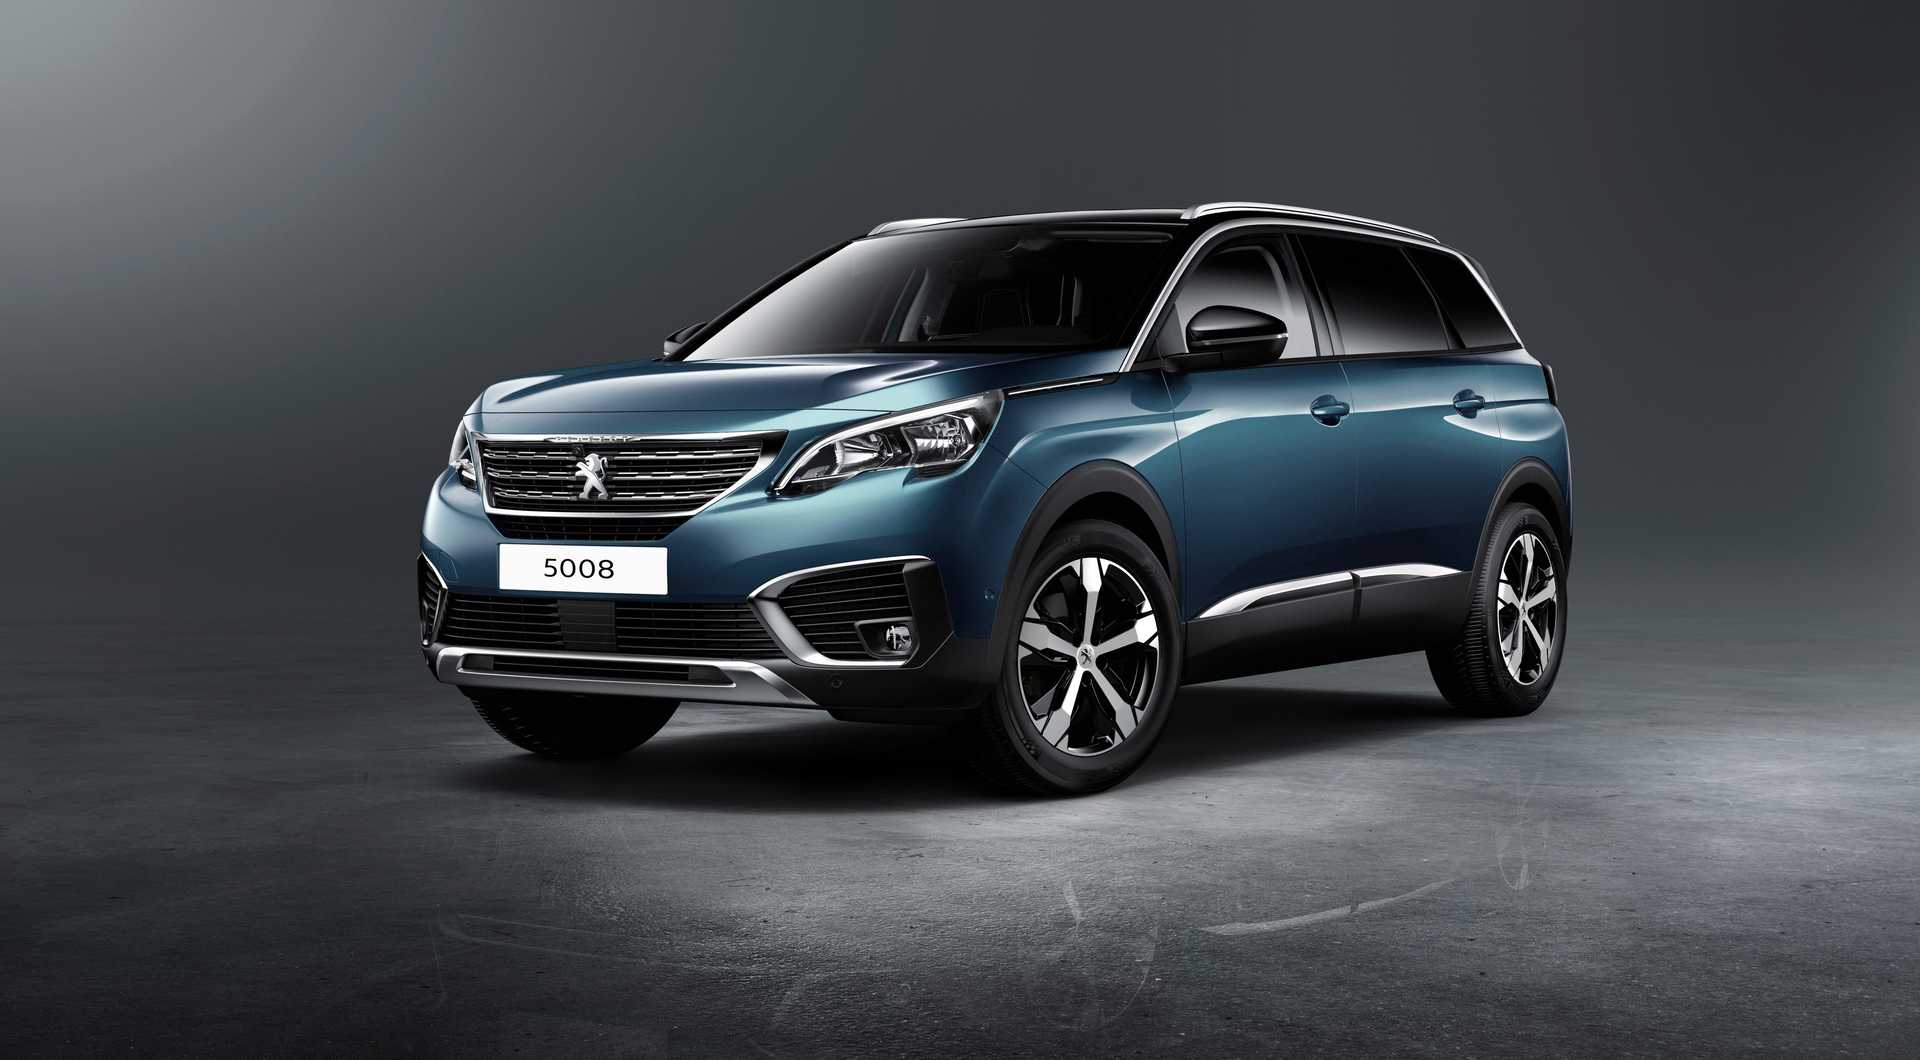 High Quality Tuning Files Peugeot 5008 1.6 Puretech Hybrid 225hp